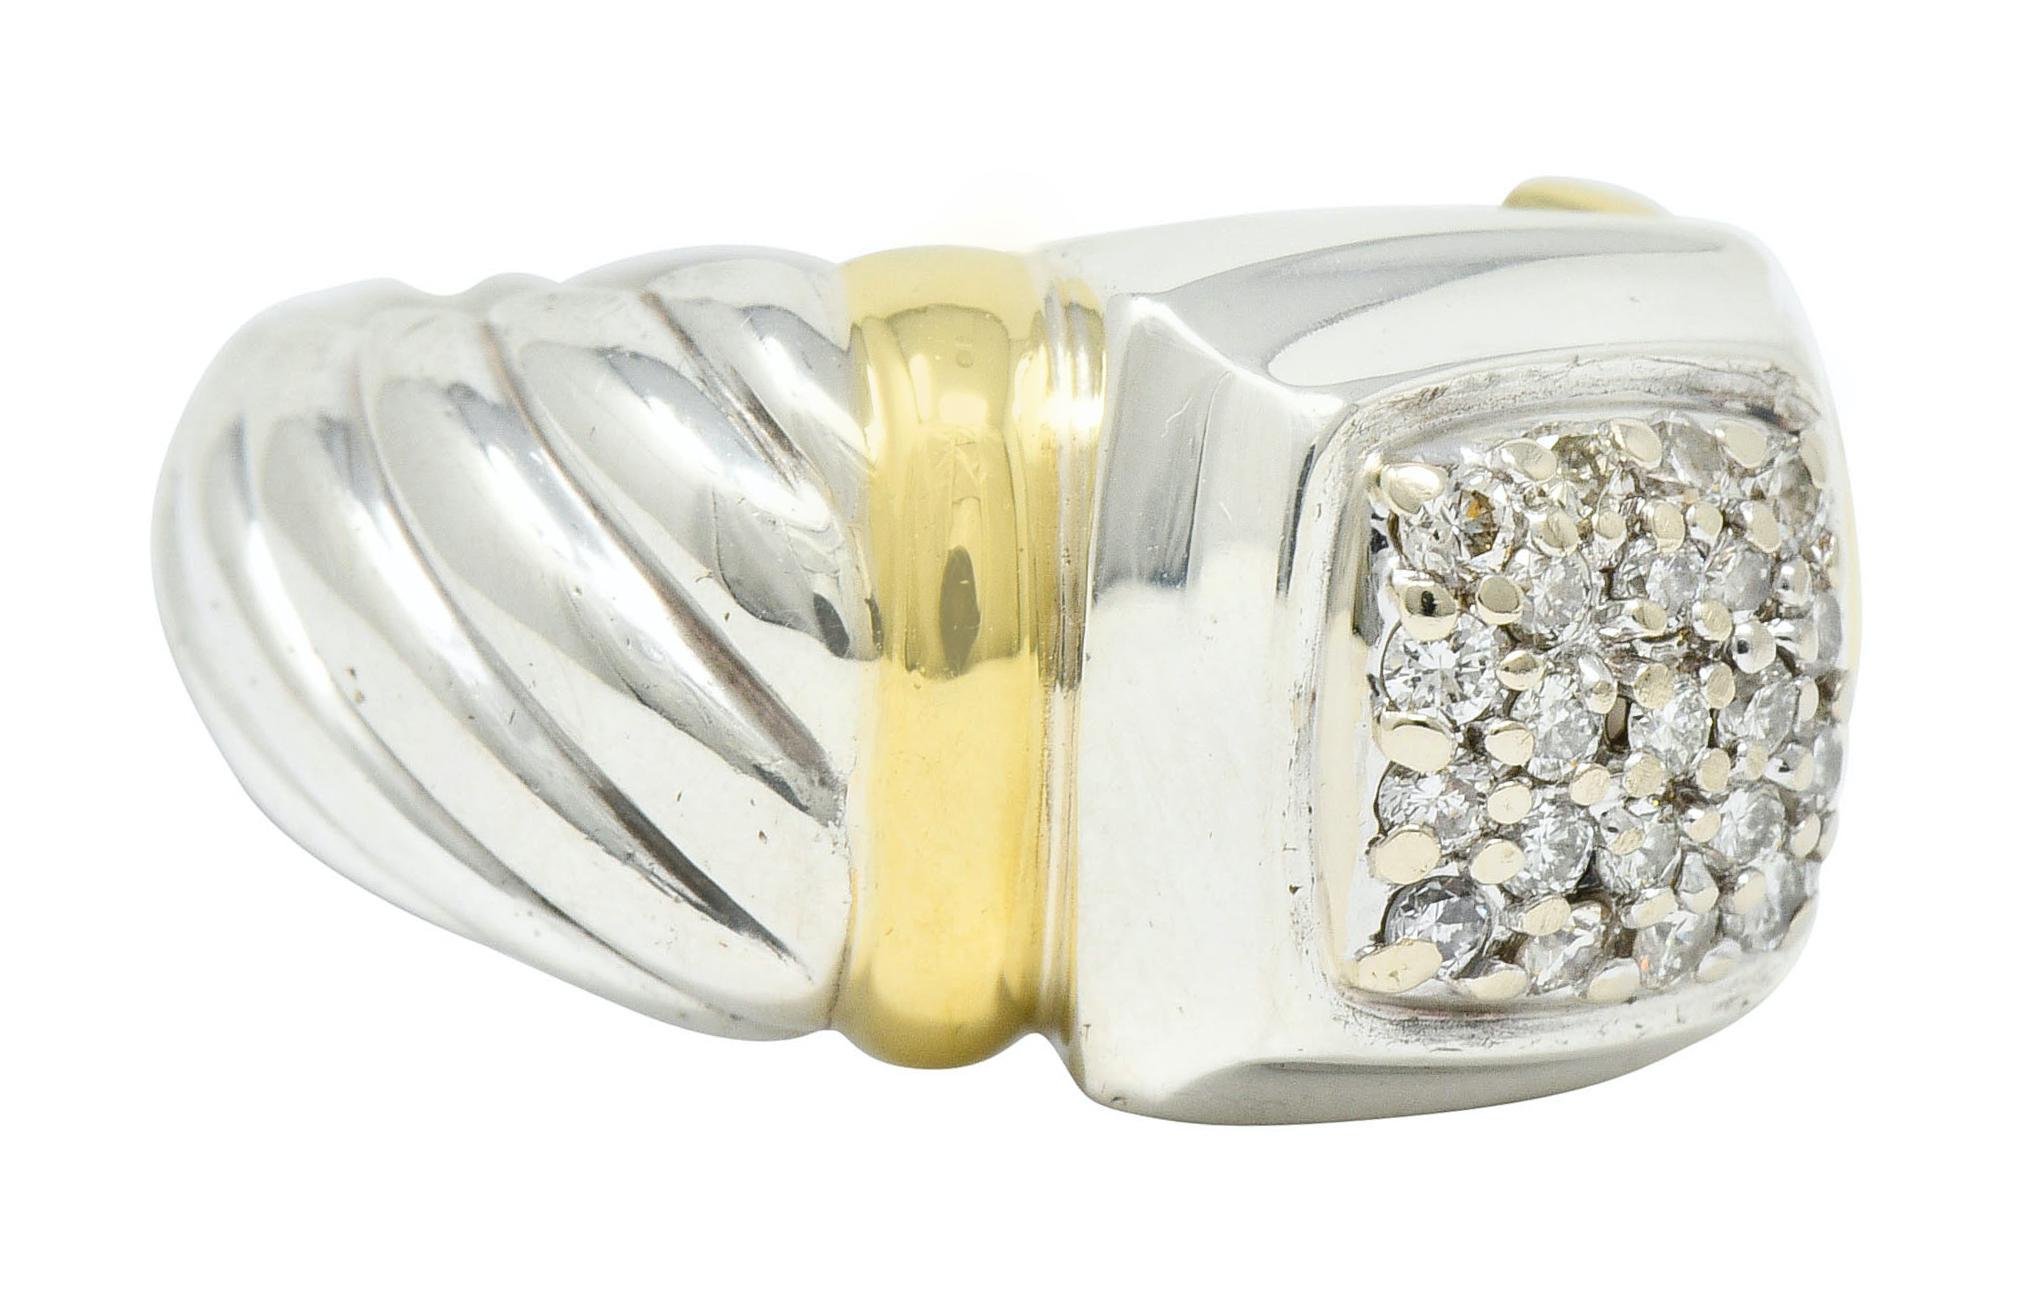 Ring features a pavè cushion center of round brilliant cut diamonds

Weighing in total approximately 0.35 carat with G/H color and SI clarity

Flanked by gold bar shoulders and a sterling silver twisted cable motif shank

Stamped 925 and 750 for